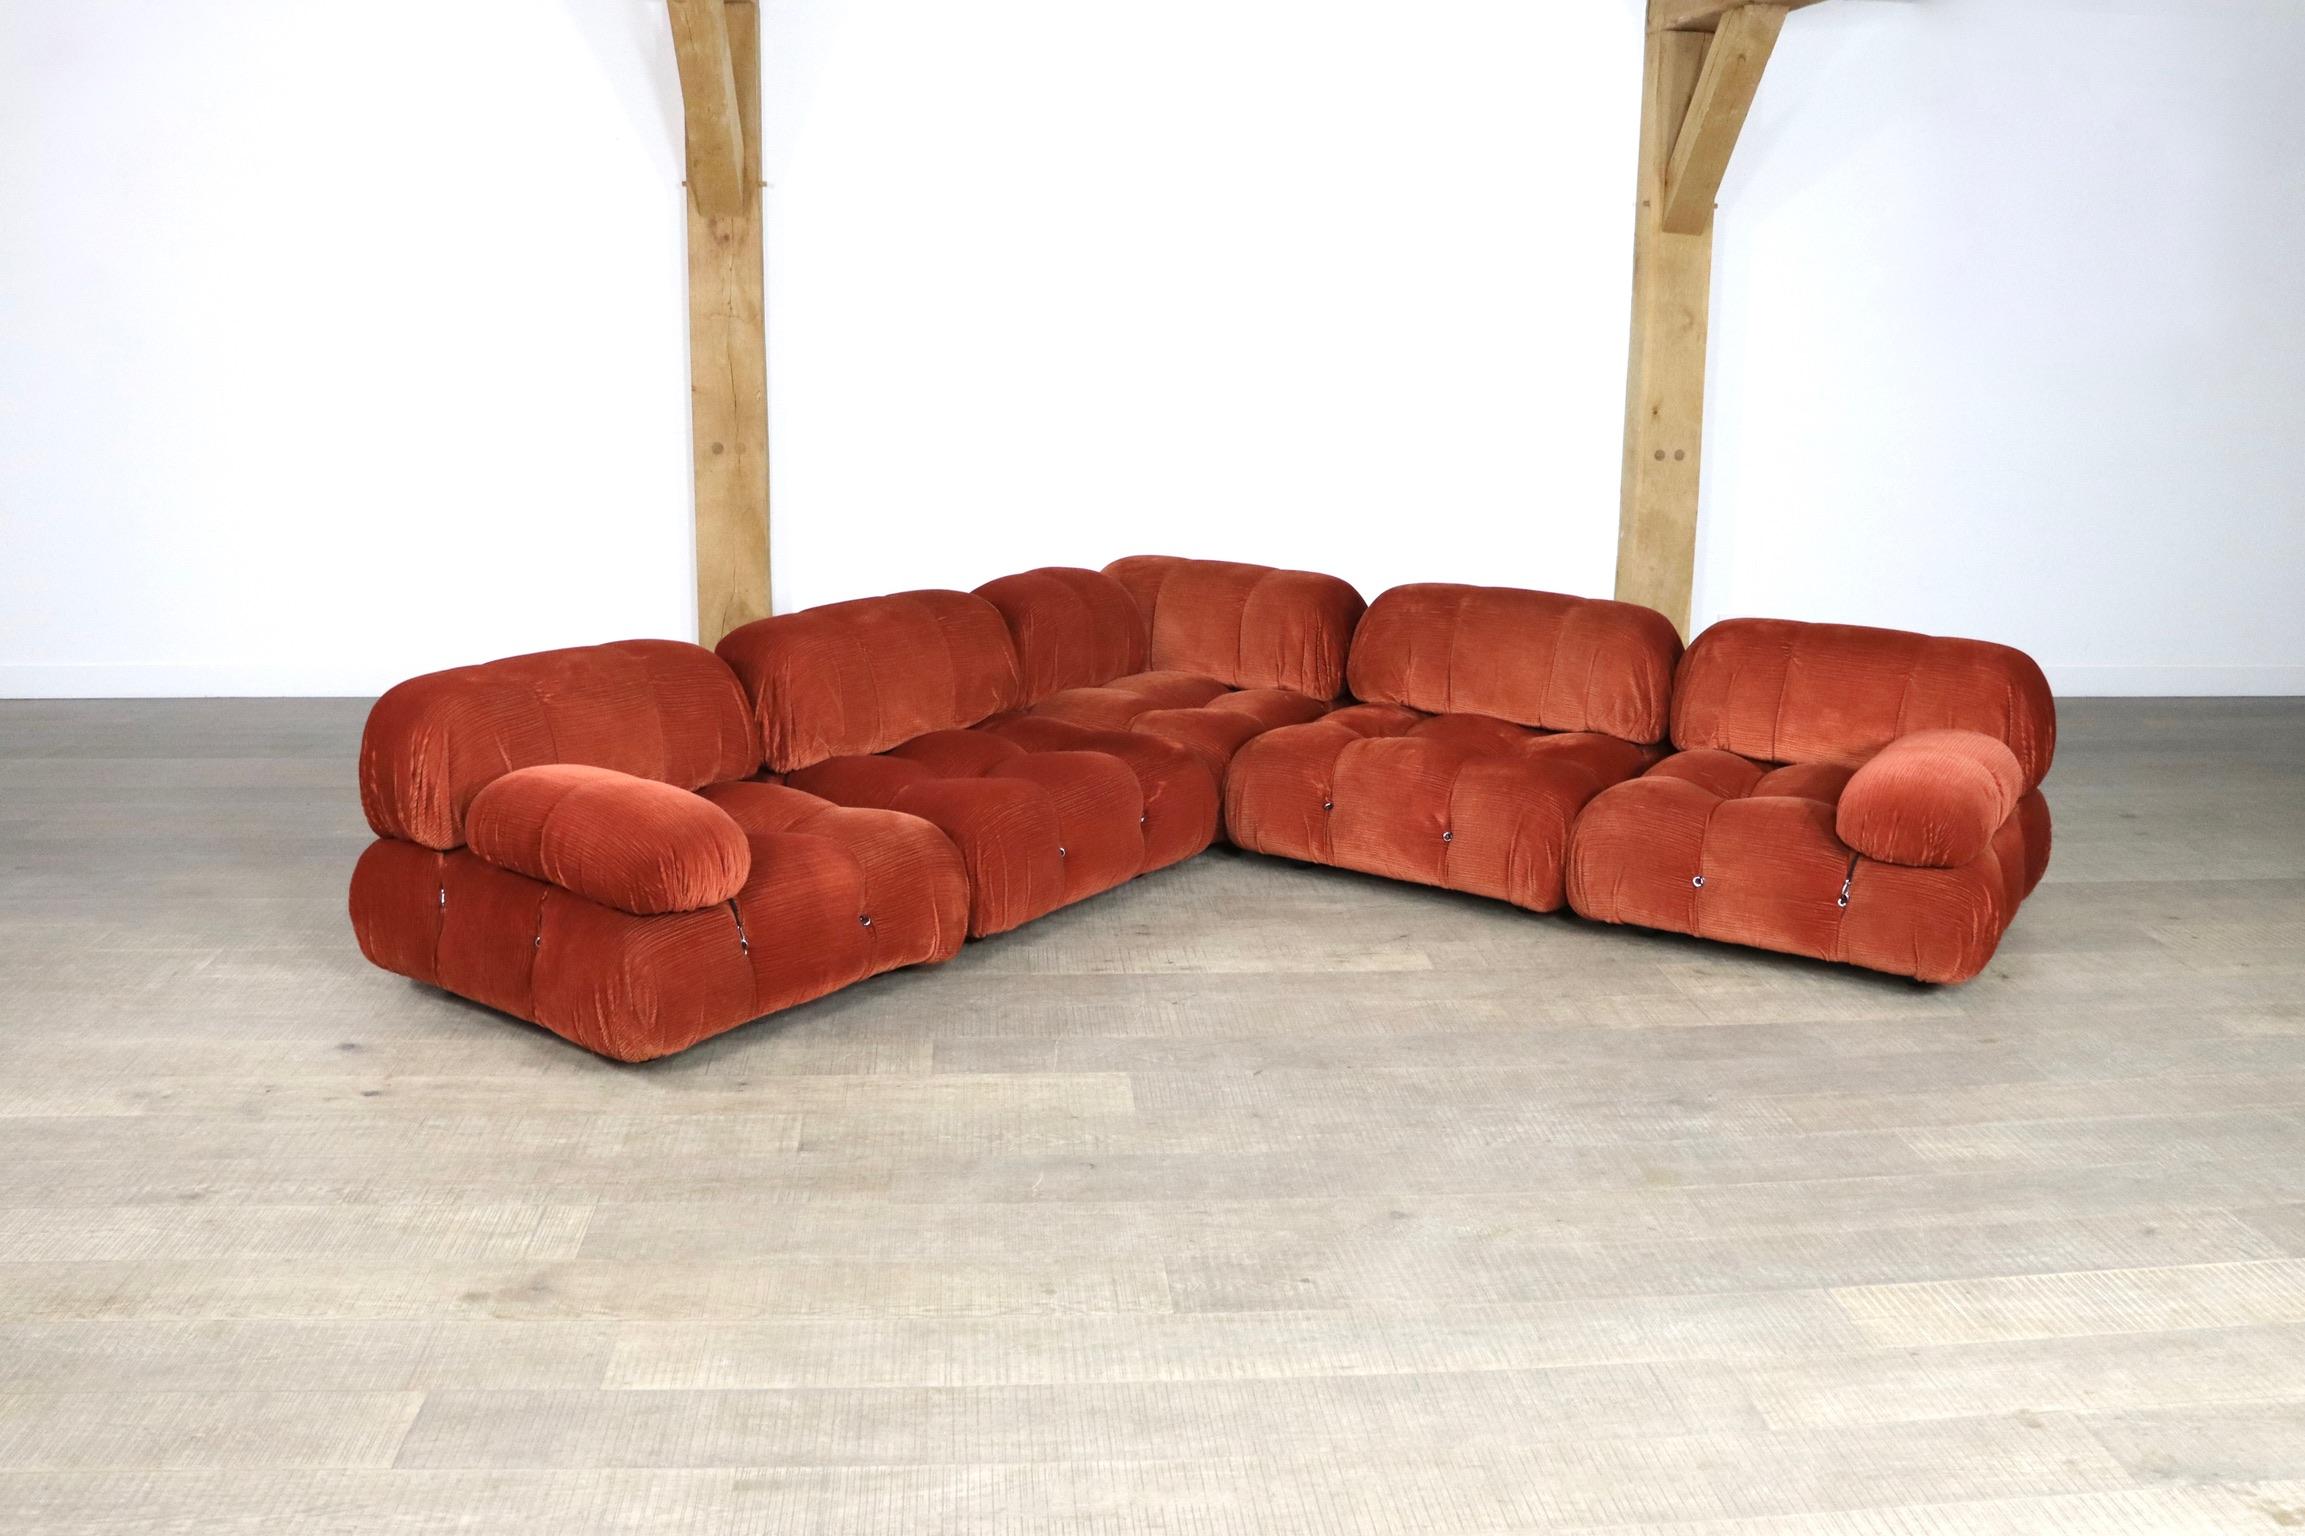 Mario Bellini, ‘Camaleonda’ sofa, in original burnt orange velvet corduroy upholstery by C&B Italia, Italy, 1972. This incredible early set consists of five large elements, of which one corner and two with armrests, all in completely original and